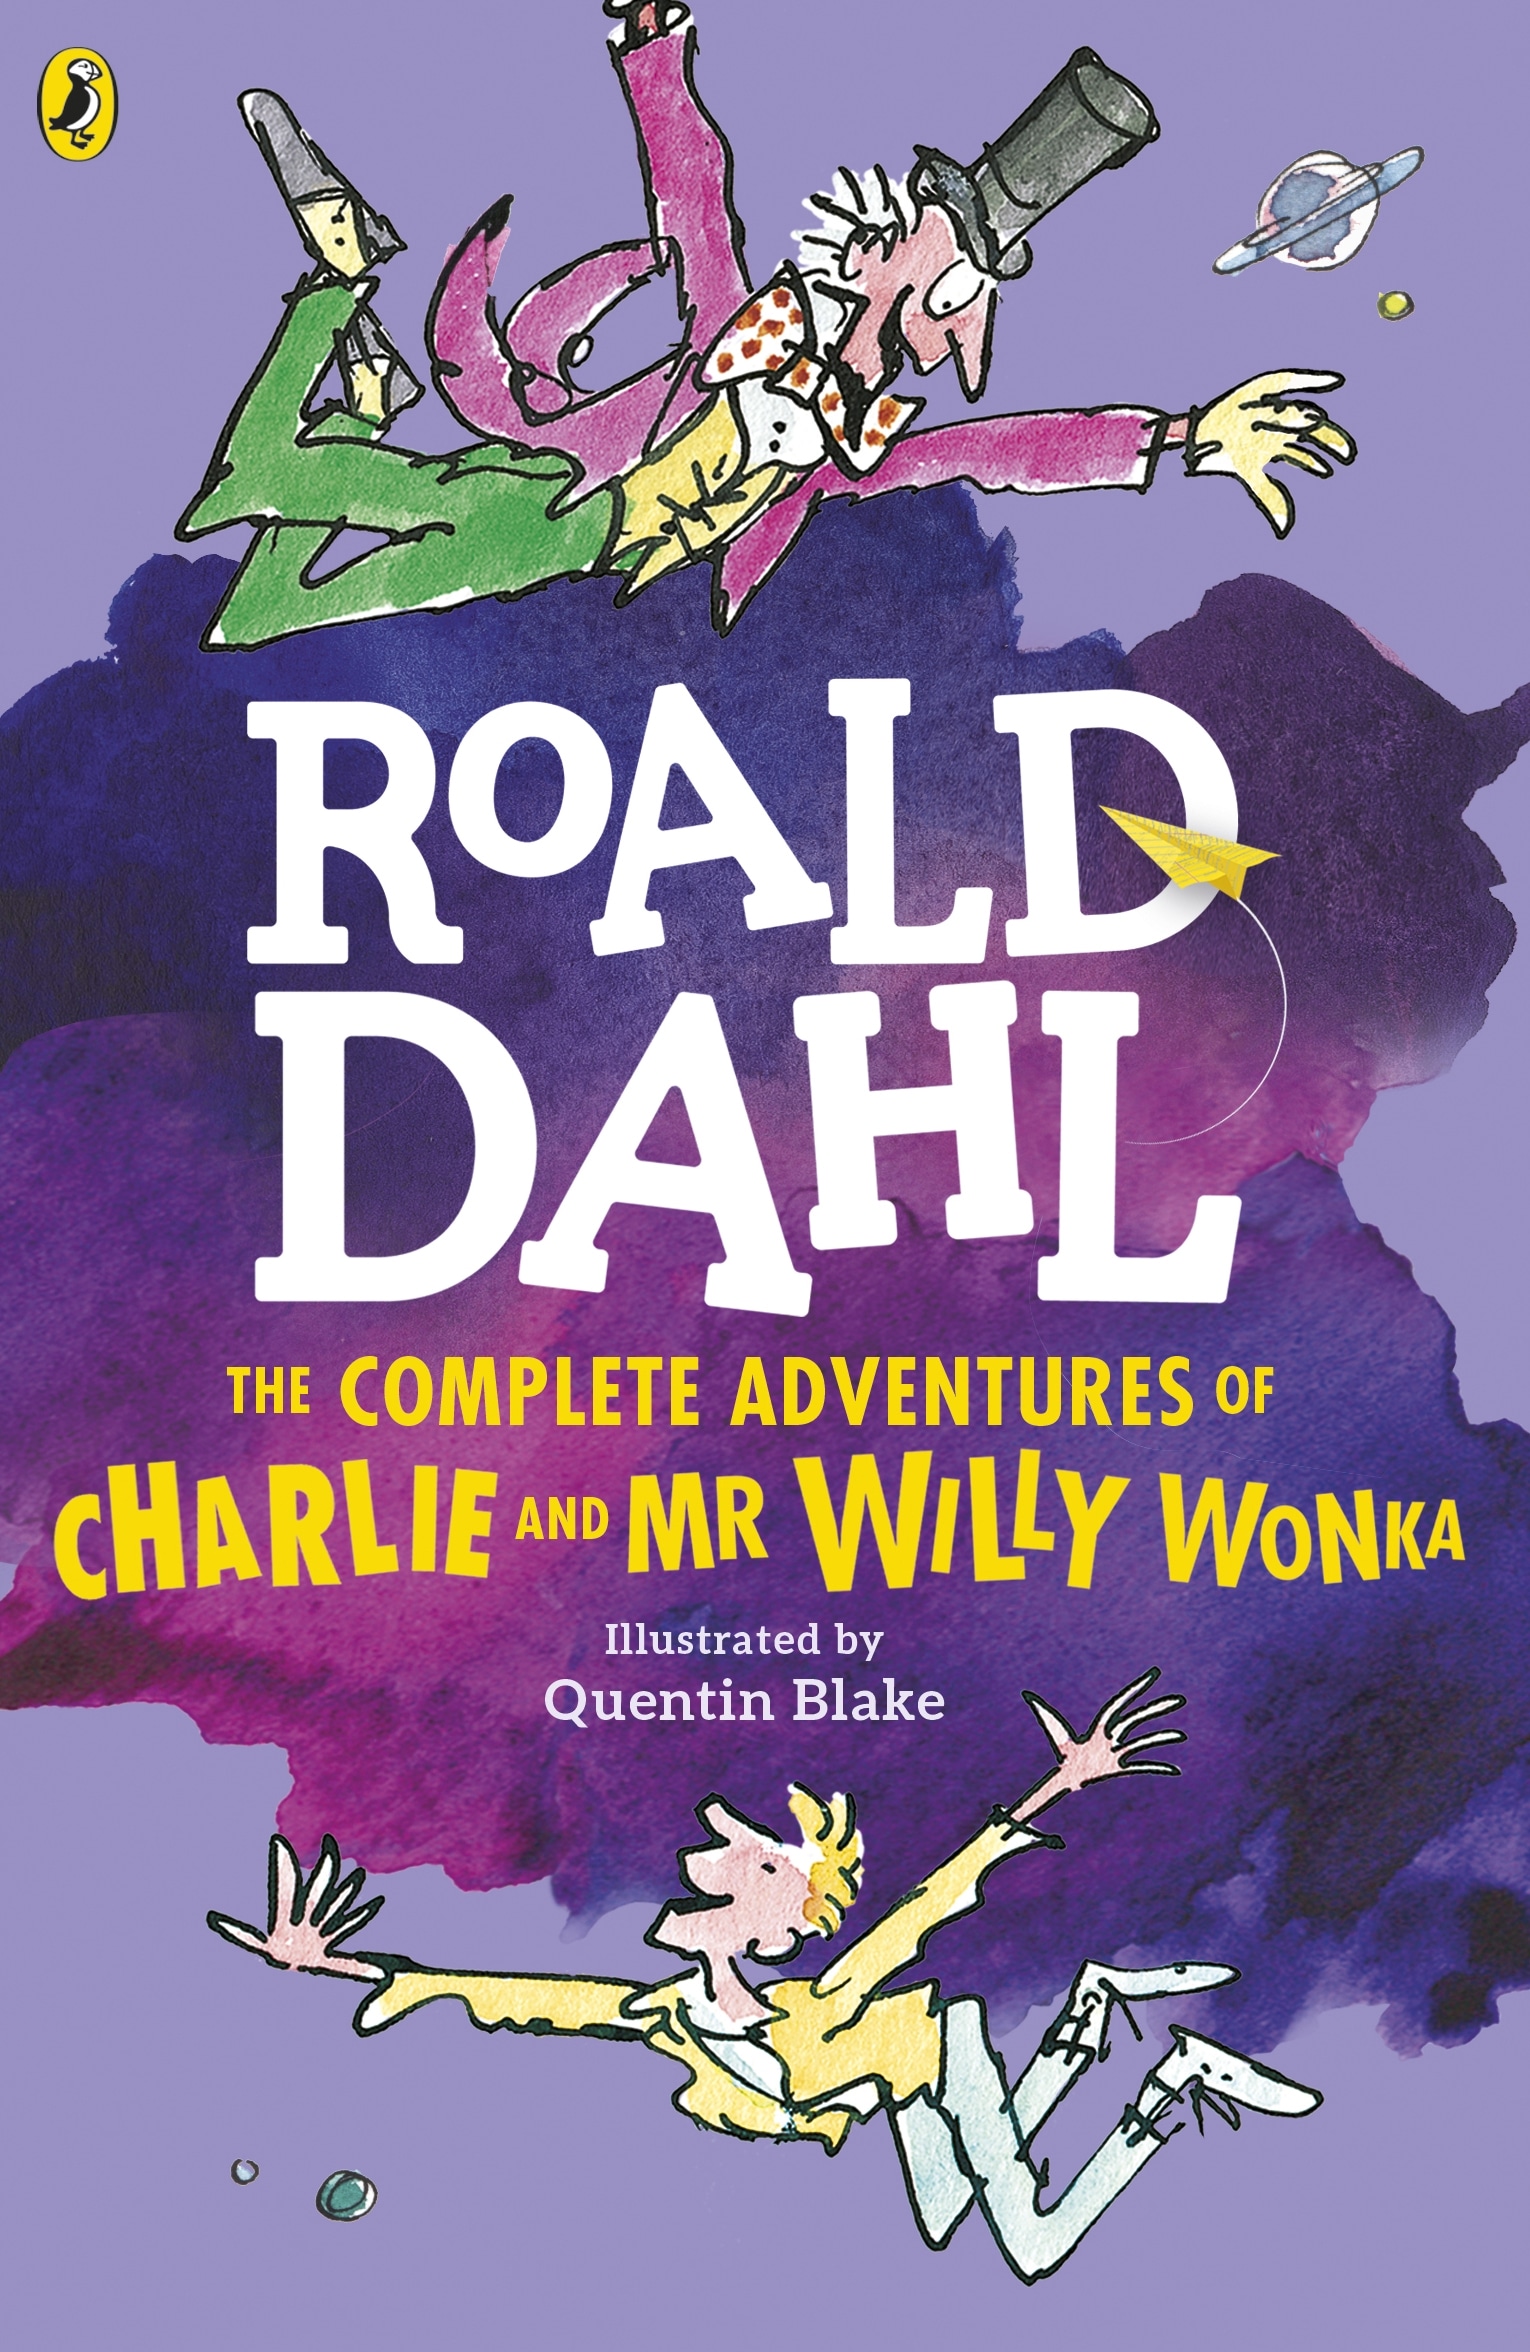 Book “The Complete Adventures of Charlie and Mr Willy Wonka” by Roald Dahl — February 11, 2016